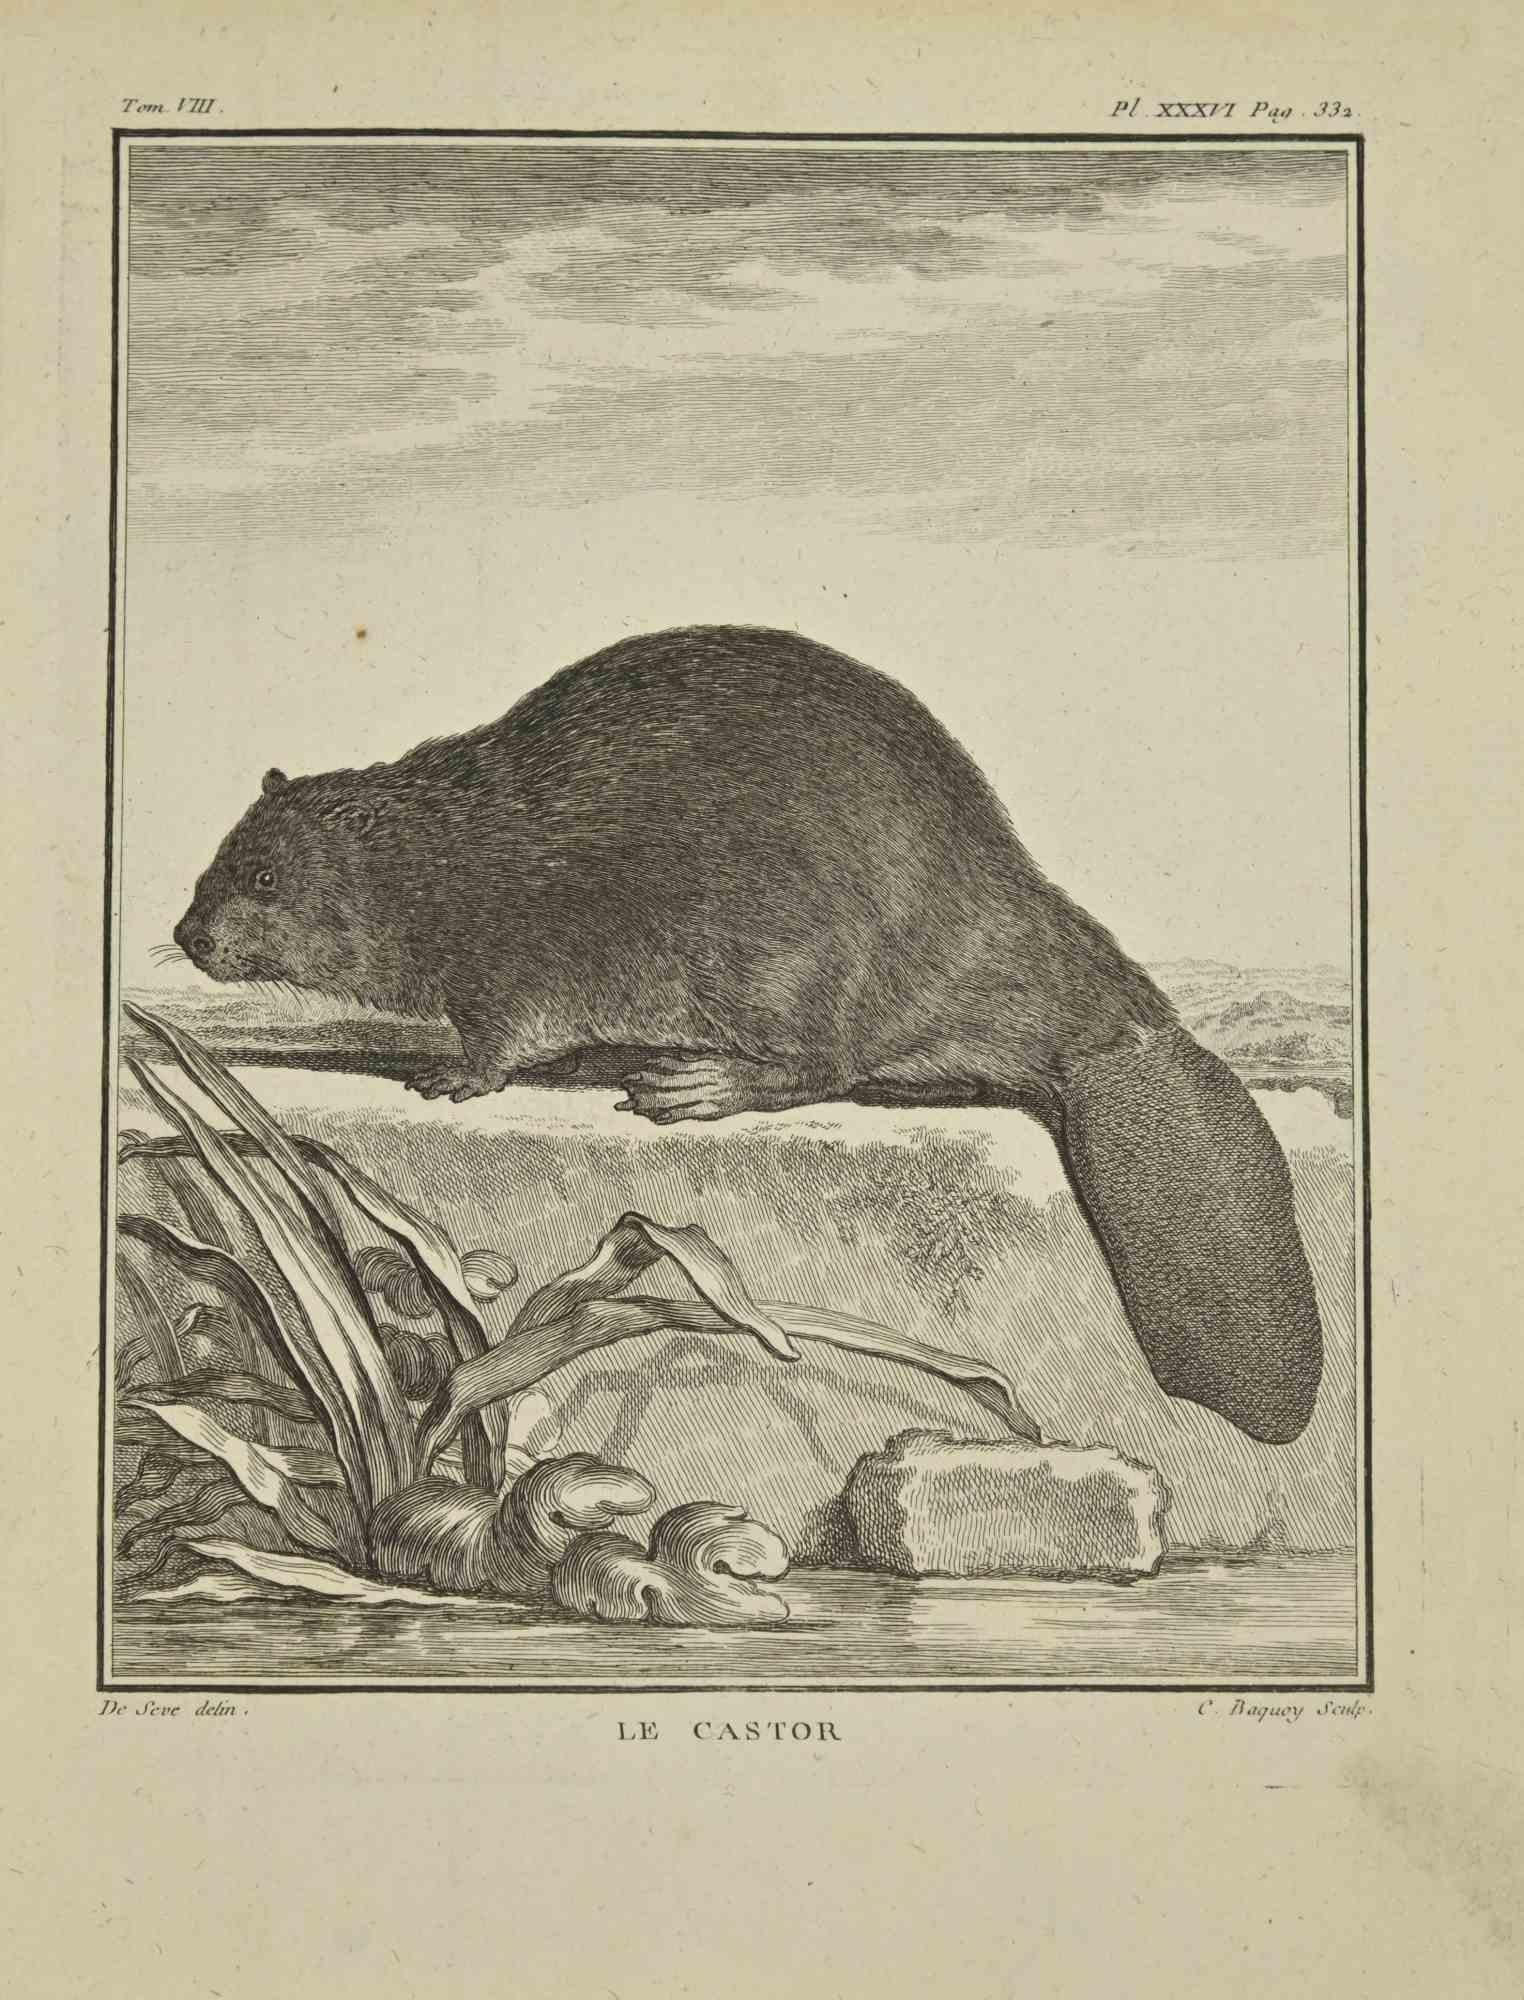 Le Castor is an etching realized by Pierre Charles Baquoy in 1771.

It belongs to the suite "Histoire naturelle, générale et particulière avec la description du Cabinet du Roi".

 
Pierre Charles Baquoy (27 July 1759 – 4 February 1829) was a French